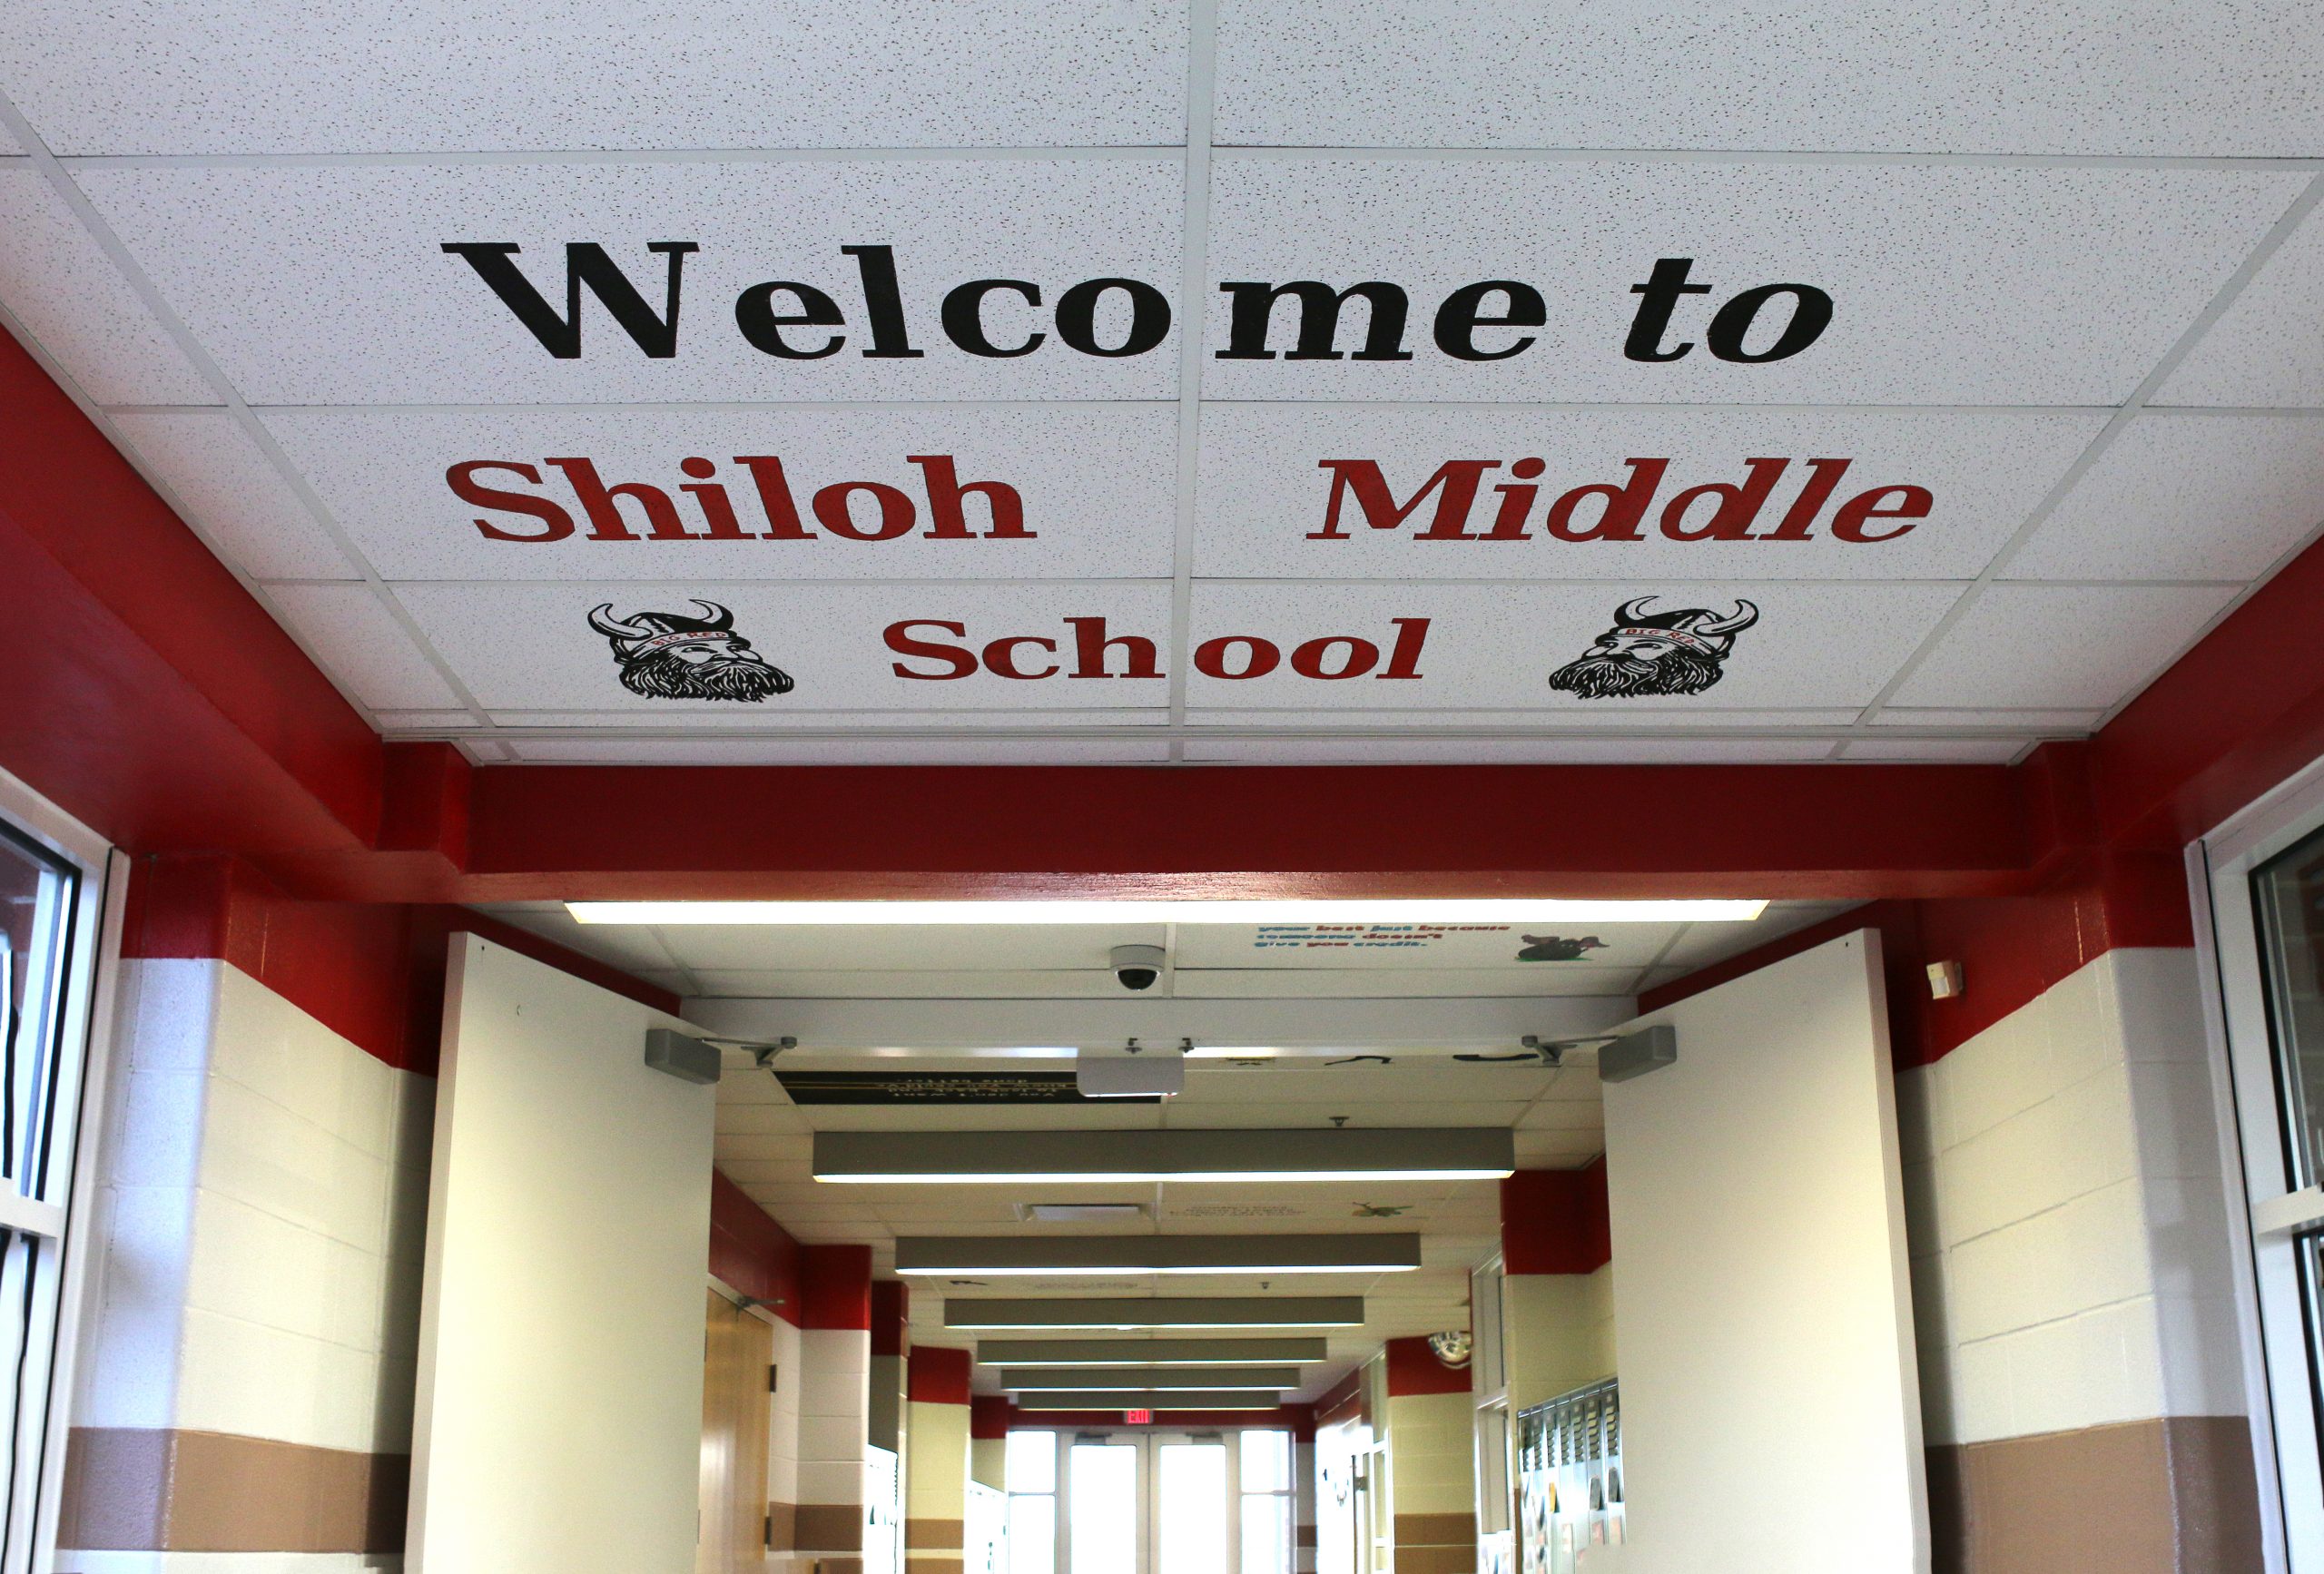 Welcome to Shiloh Middle School: a hallway adorned with a sign bearing the school's name.